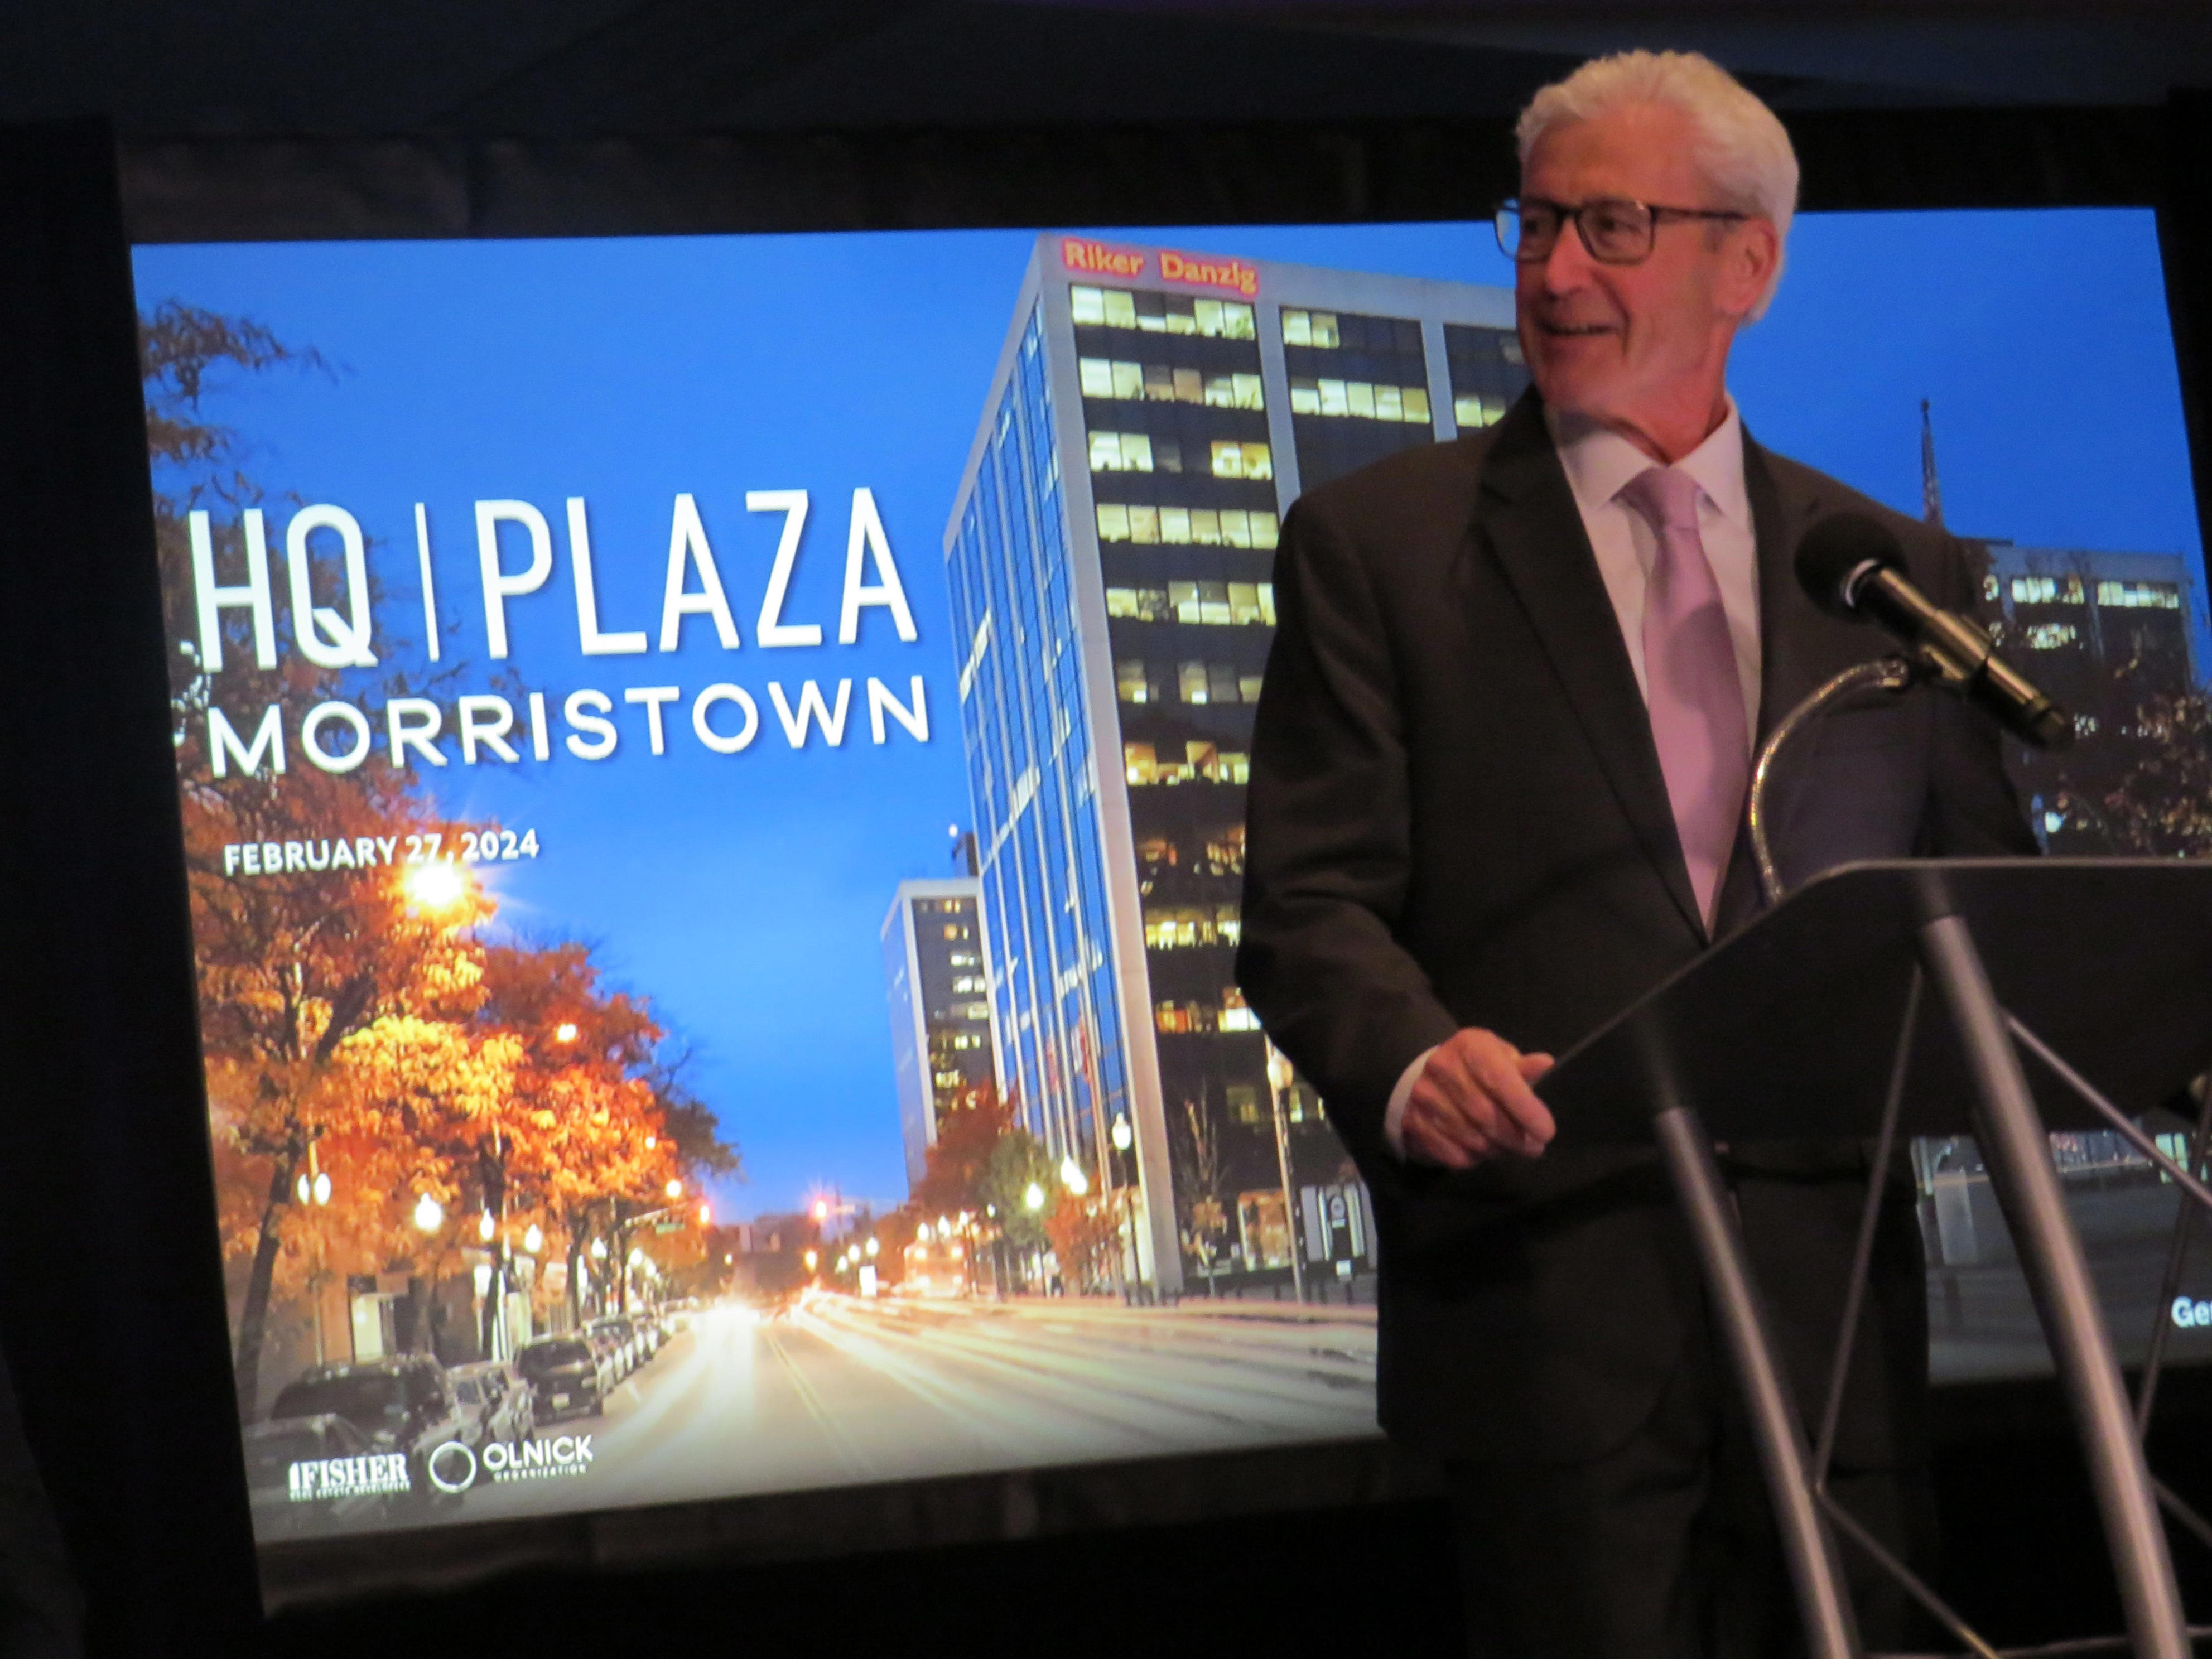 morristown's headquarters plaza to get new name and $7m facelift. here's what's coming